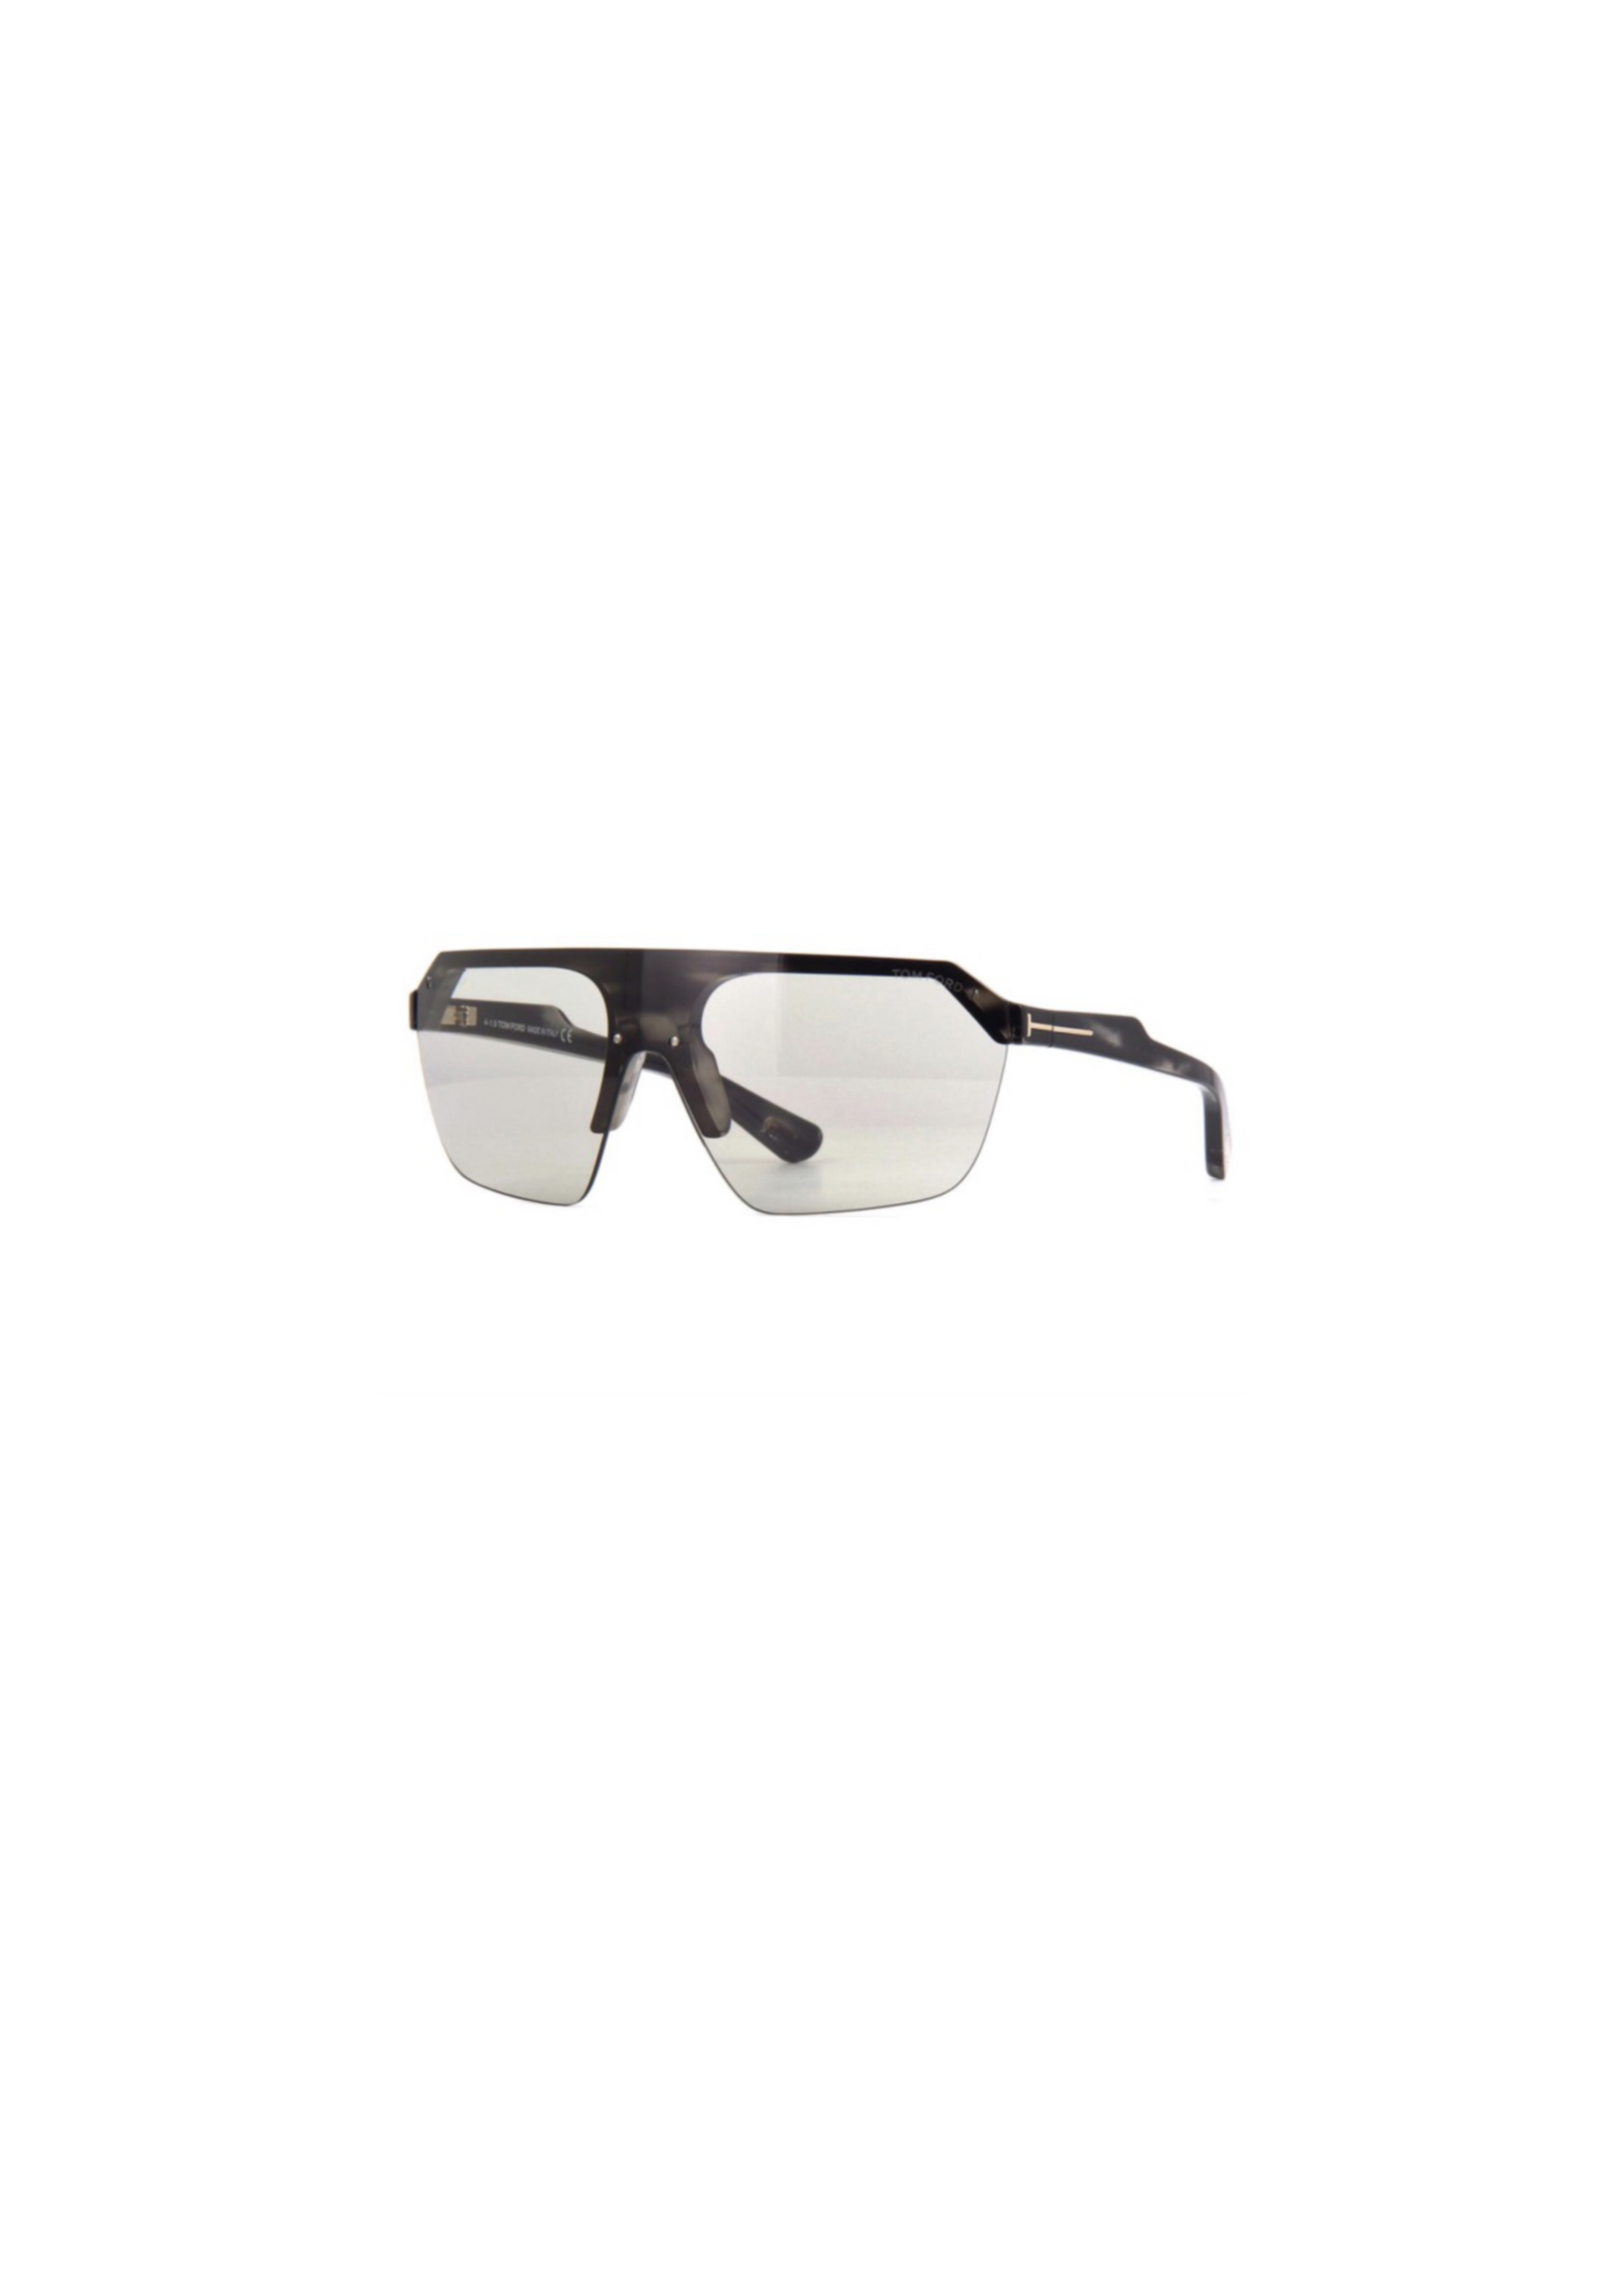 TOM FORD FT0797 56A 00   Main color: Brown Frame color: Brown Frame material: Plastic Lenses color: Grey Lenses material: Plastic Filter category: 1 Style: Mono Lens Protection: 100% UVA & UVB Size: 68-03-130 Lenses width: 68 Millimeter Lenses height: 55 Millimeter Frame width: 150 Millimeter Temples length: 130 Millimeter Spring hinge: No Shipment includes : Case, cleaning cloth 